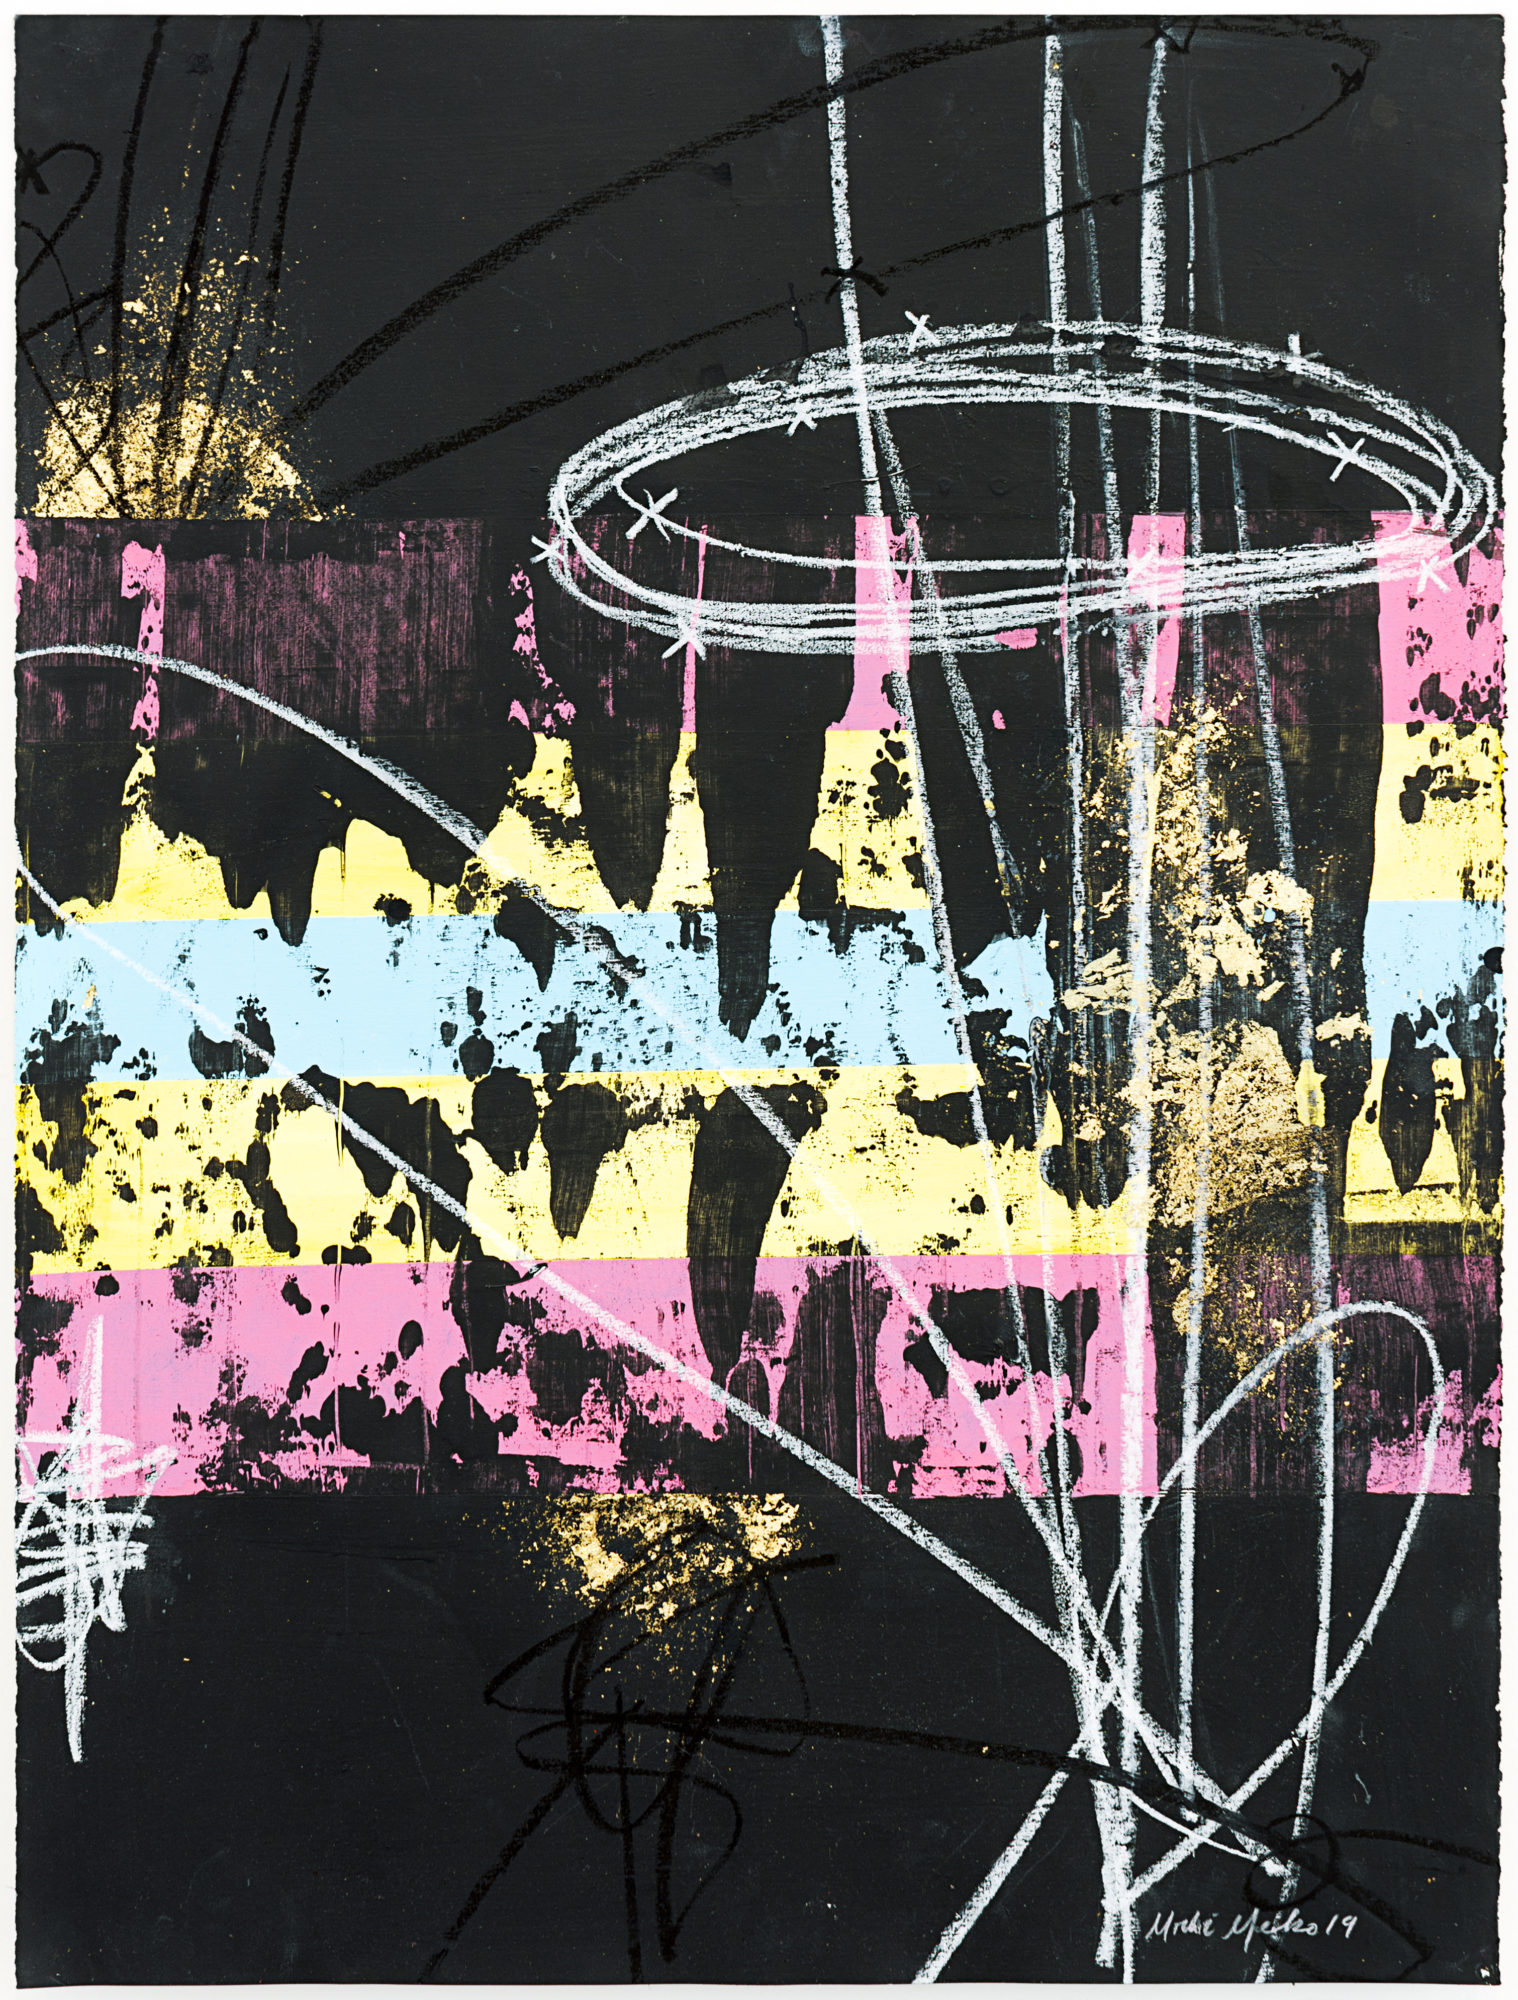 A multi-media work containing black and white elements, gold leaf and a series of horizontal bands of color stretching across its entirety